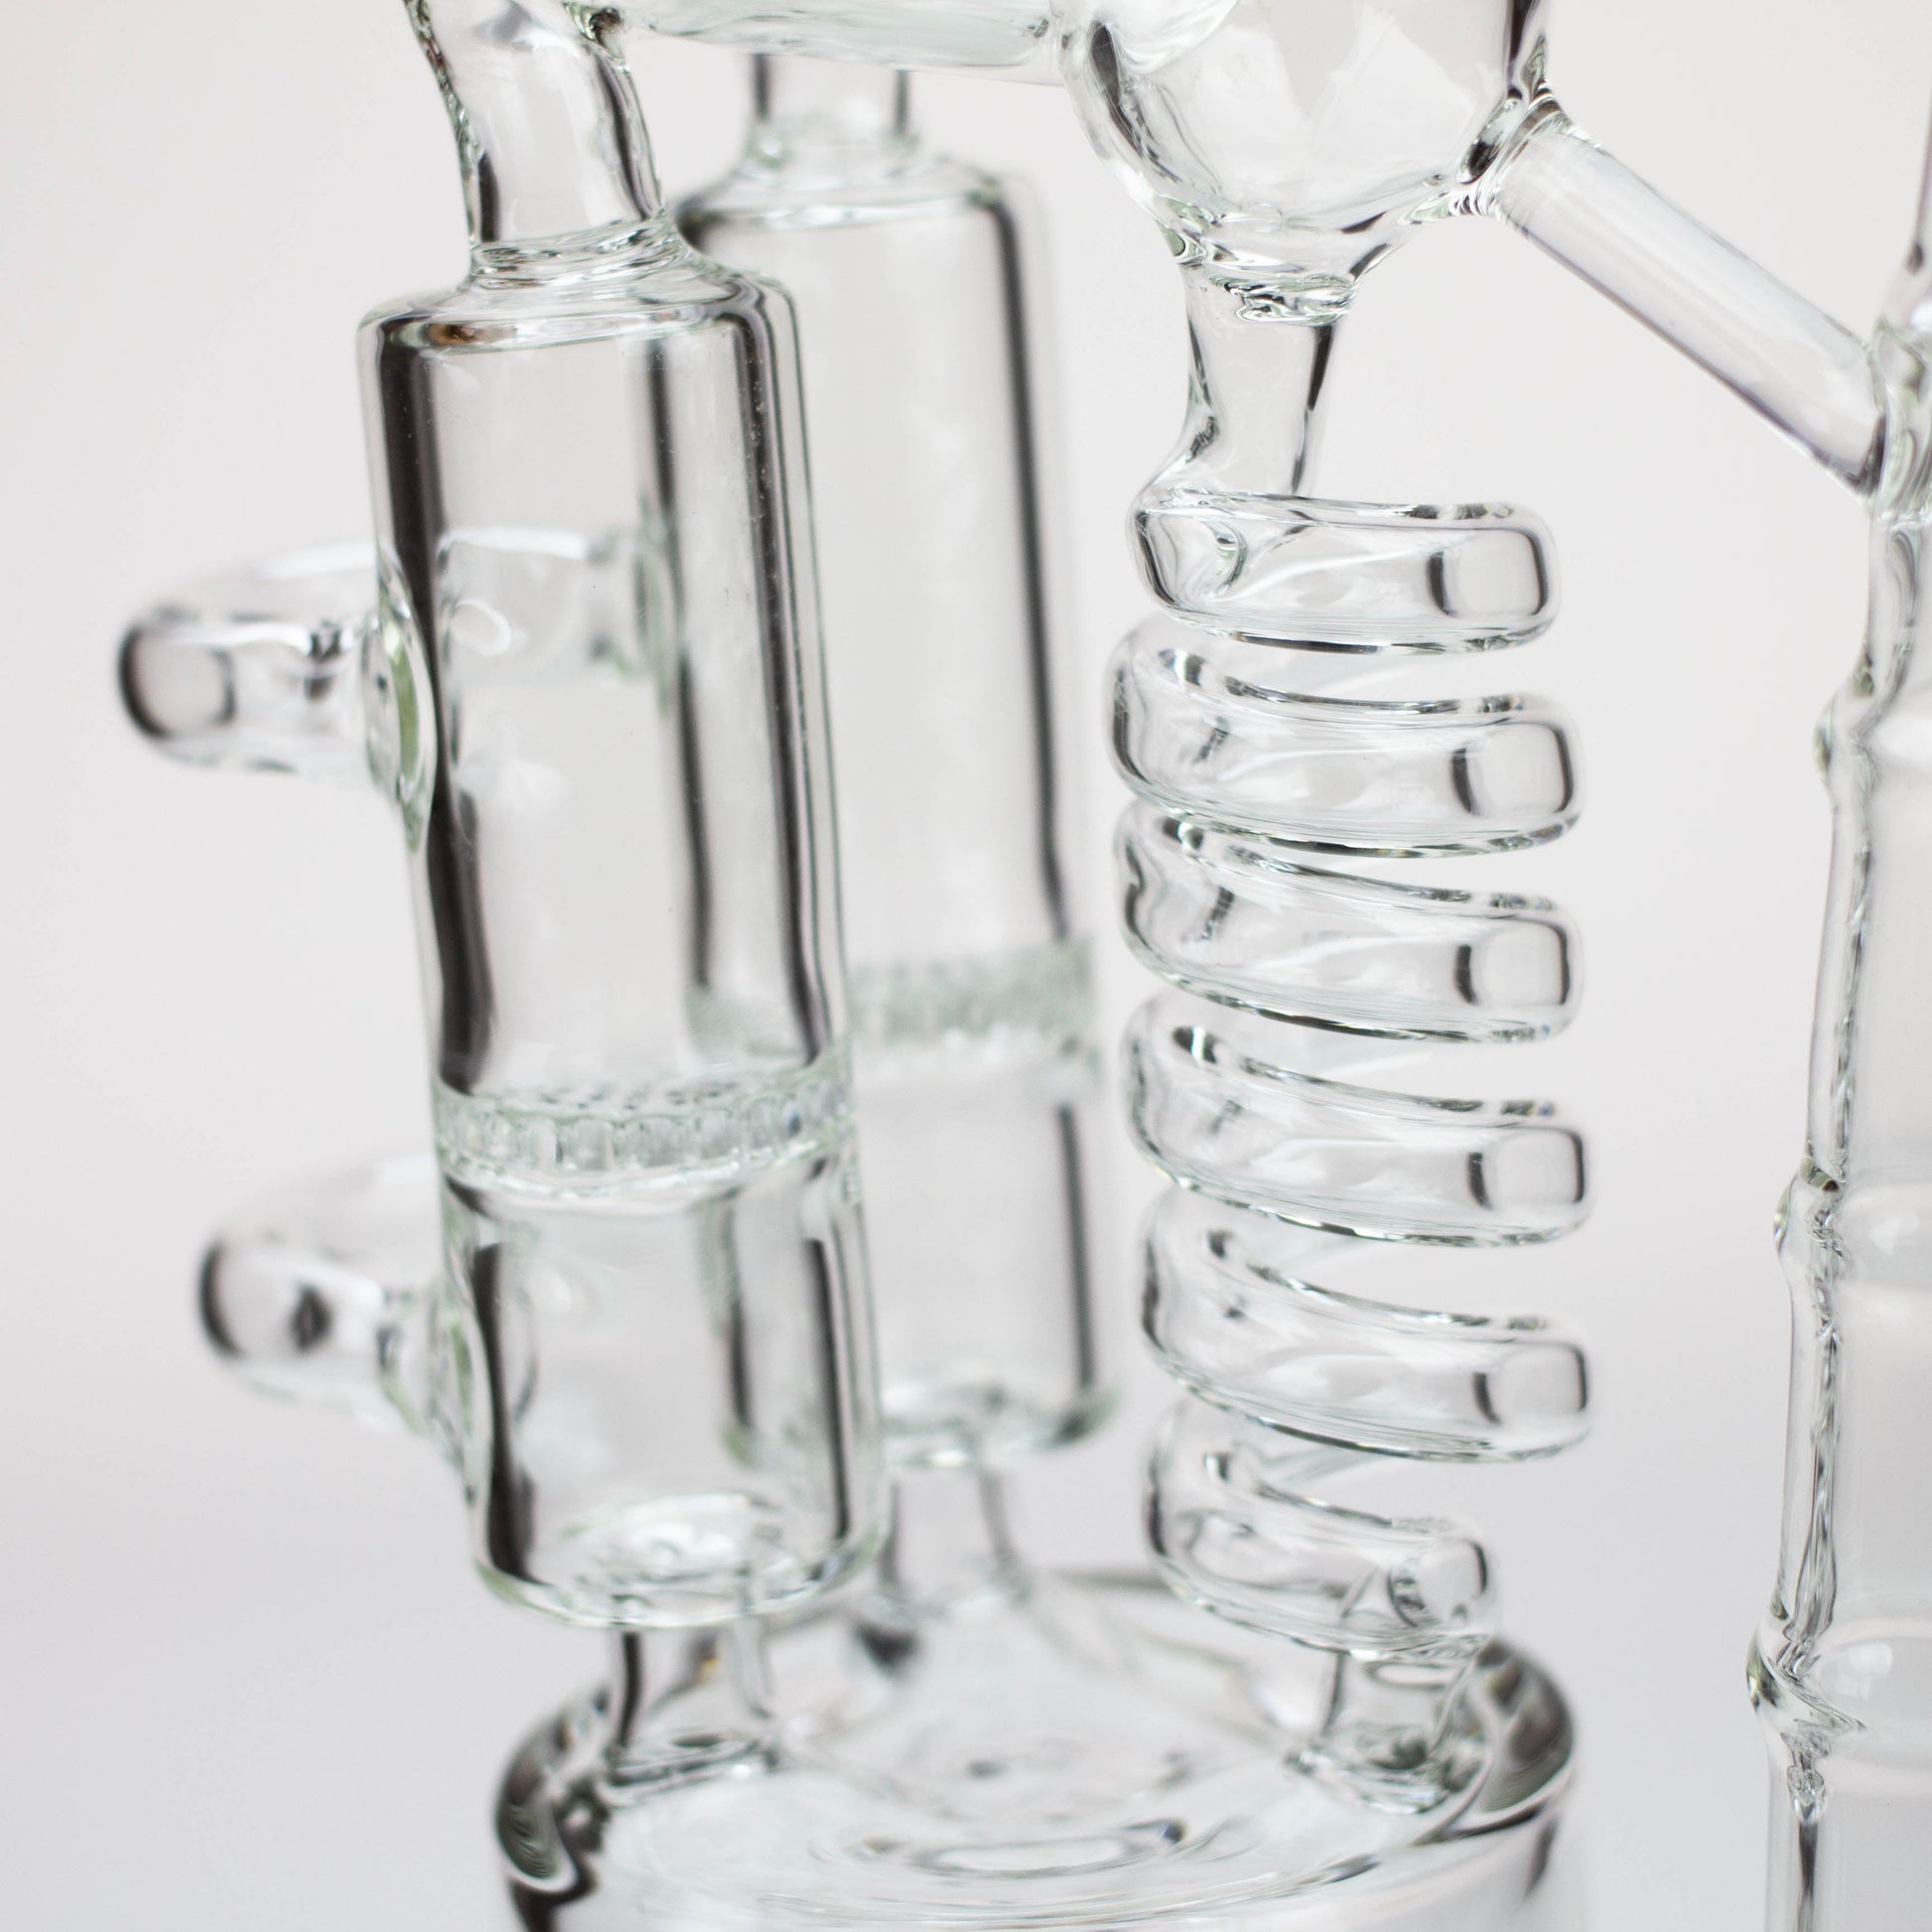 12" H2O Coil Glass water recycle bong_9